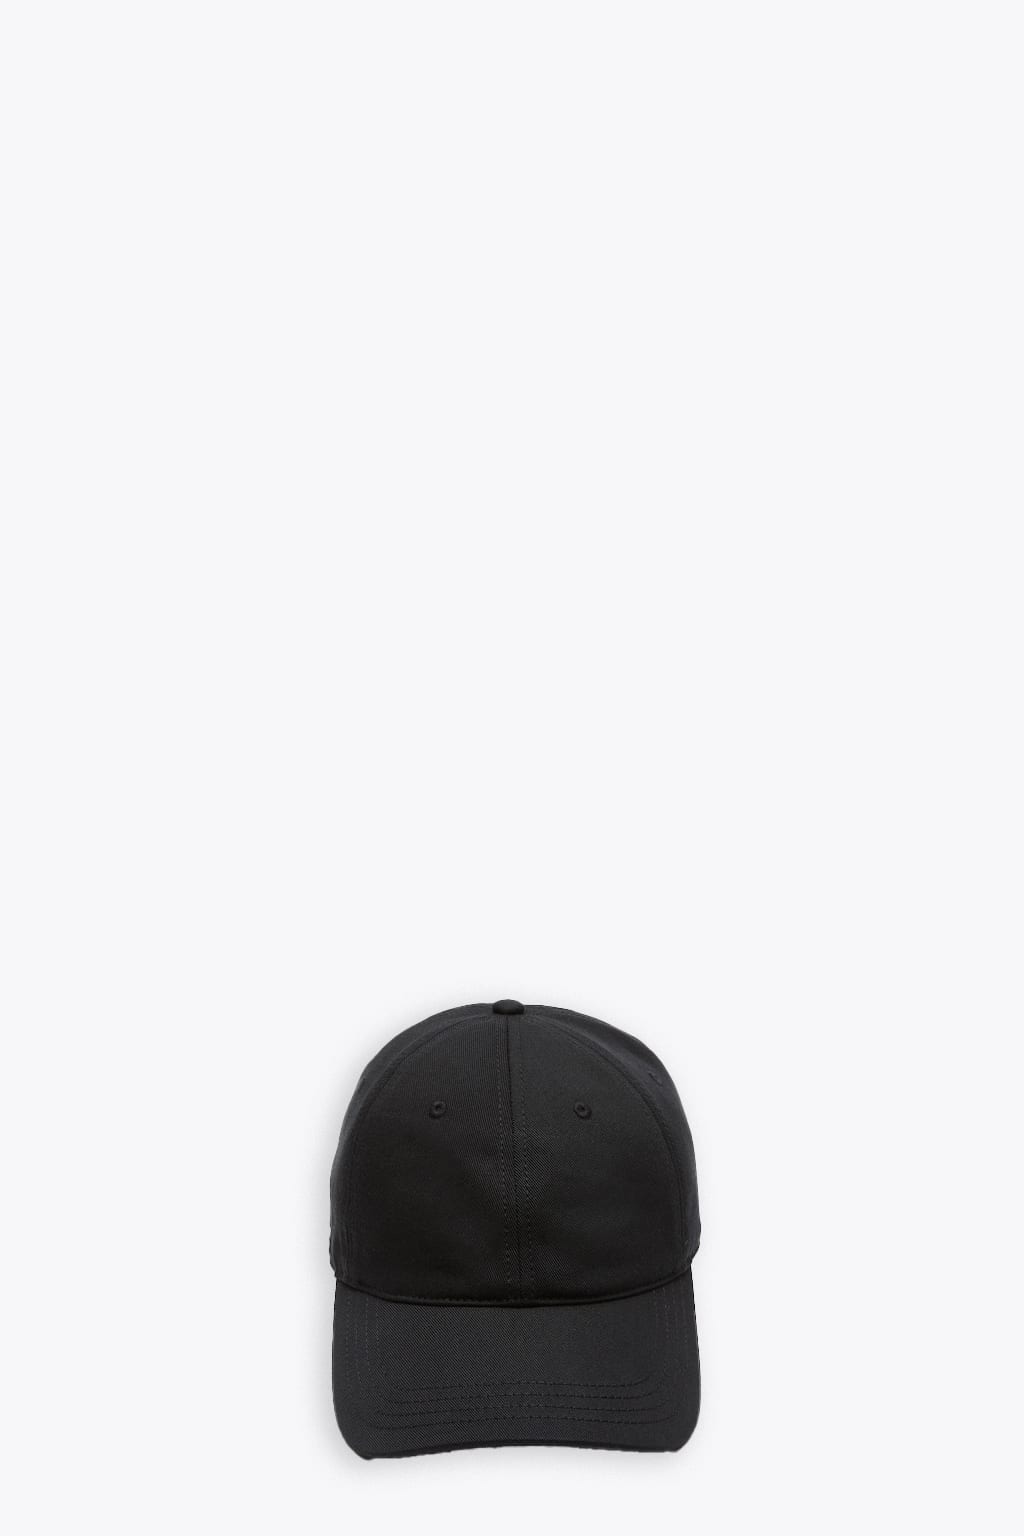 LACOSTE CAPPELLINO BLACK COTTON CAP WITH SIDE LOGO PATCH